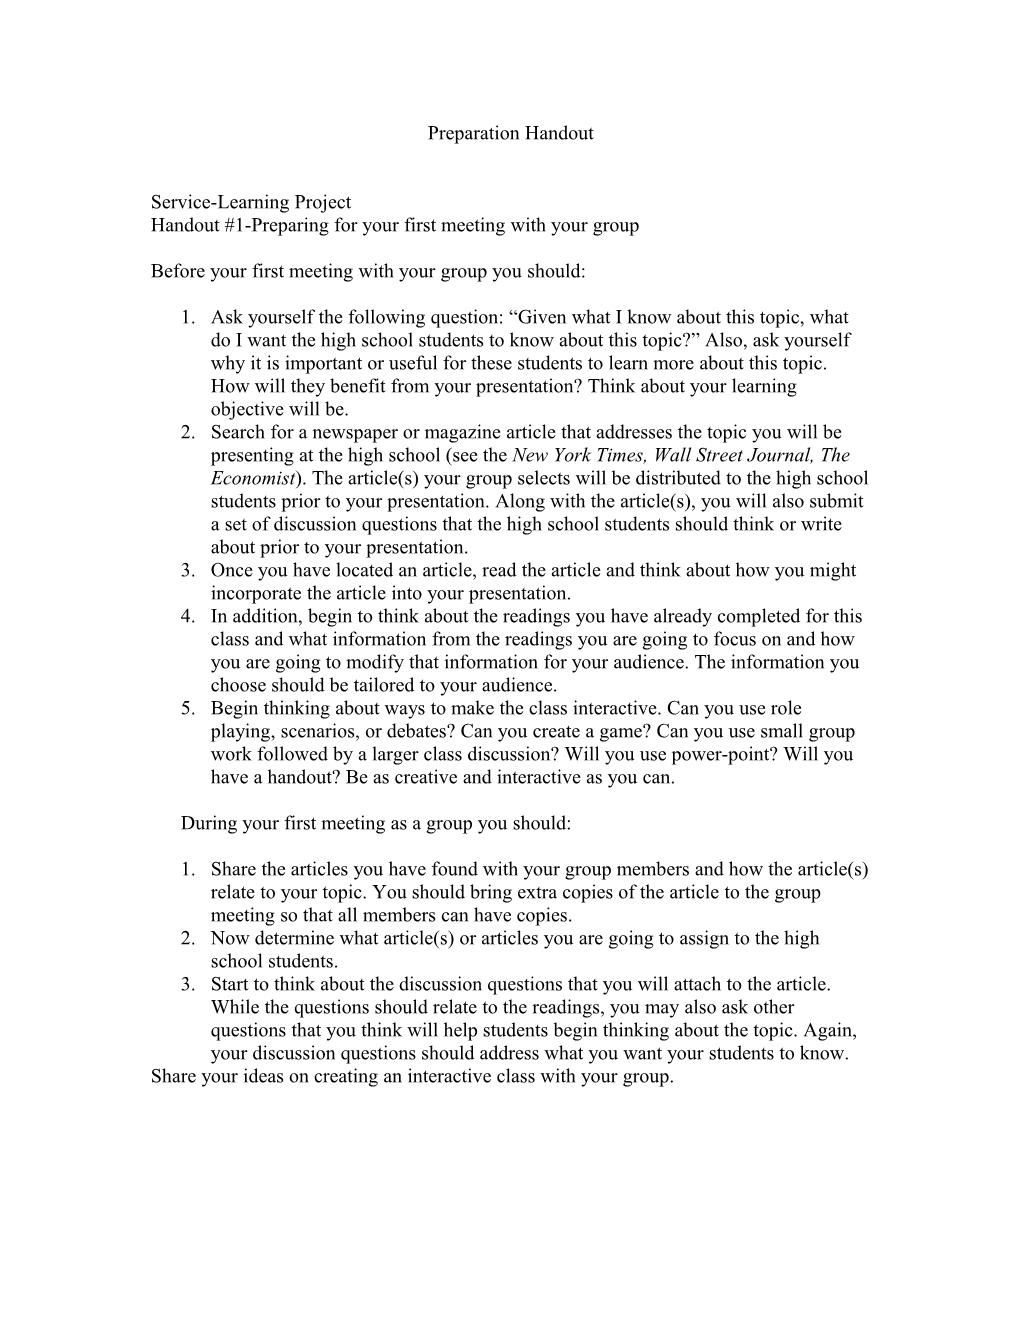 Handout #1-Preparing for Your First Meeting with Your Group